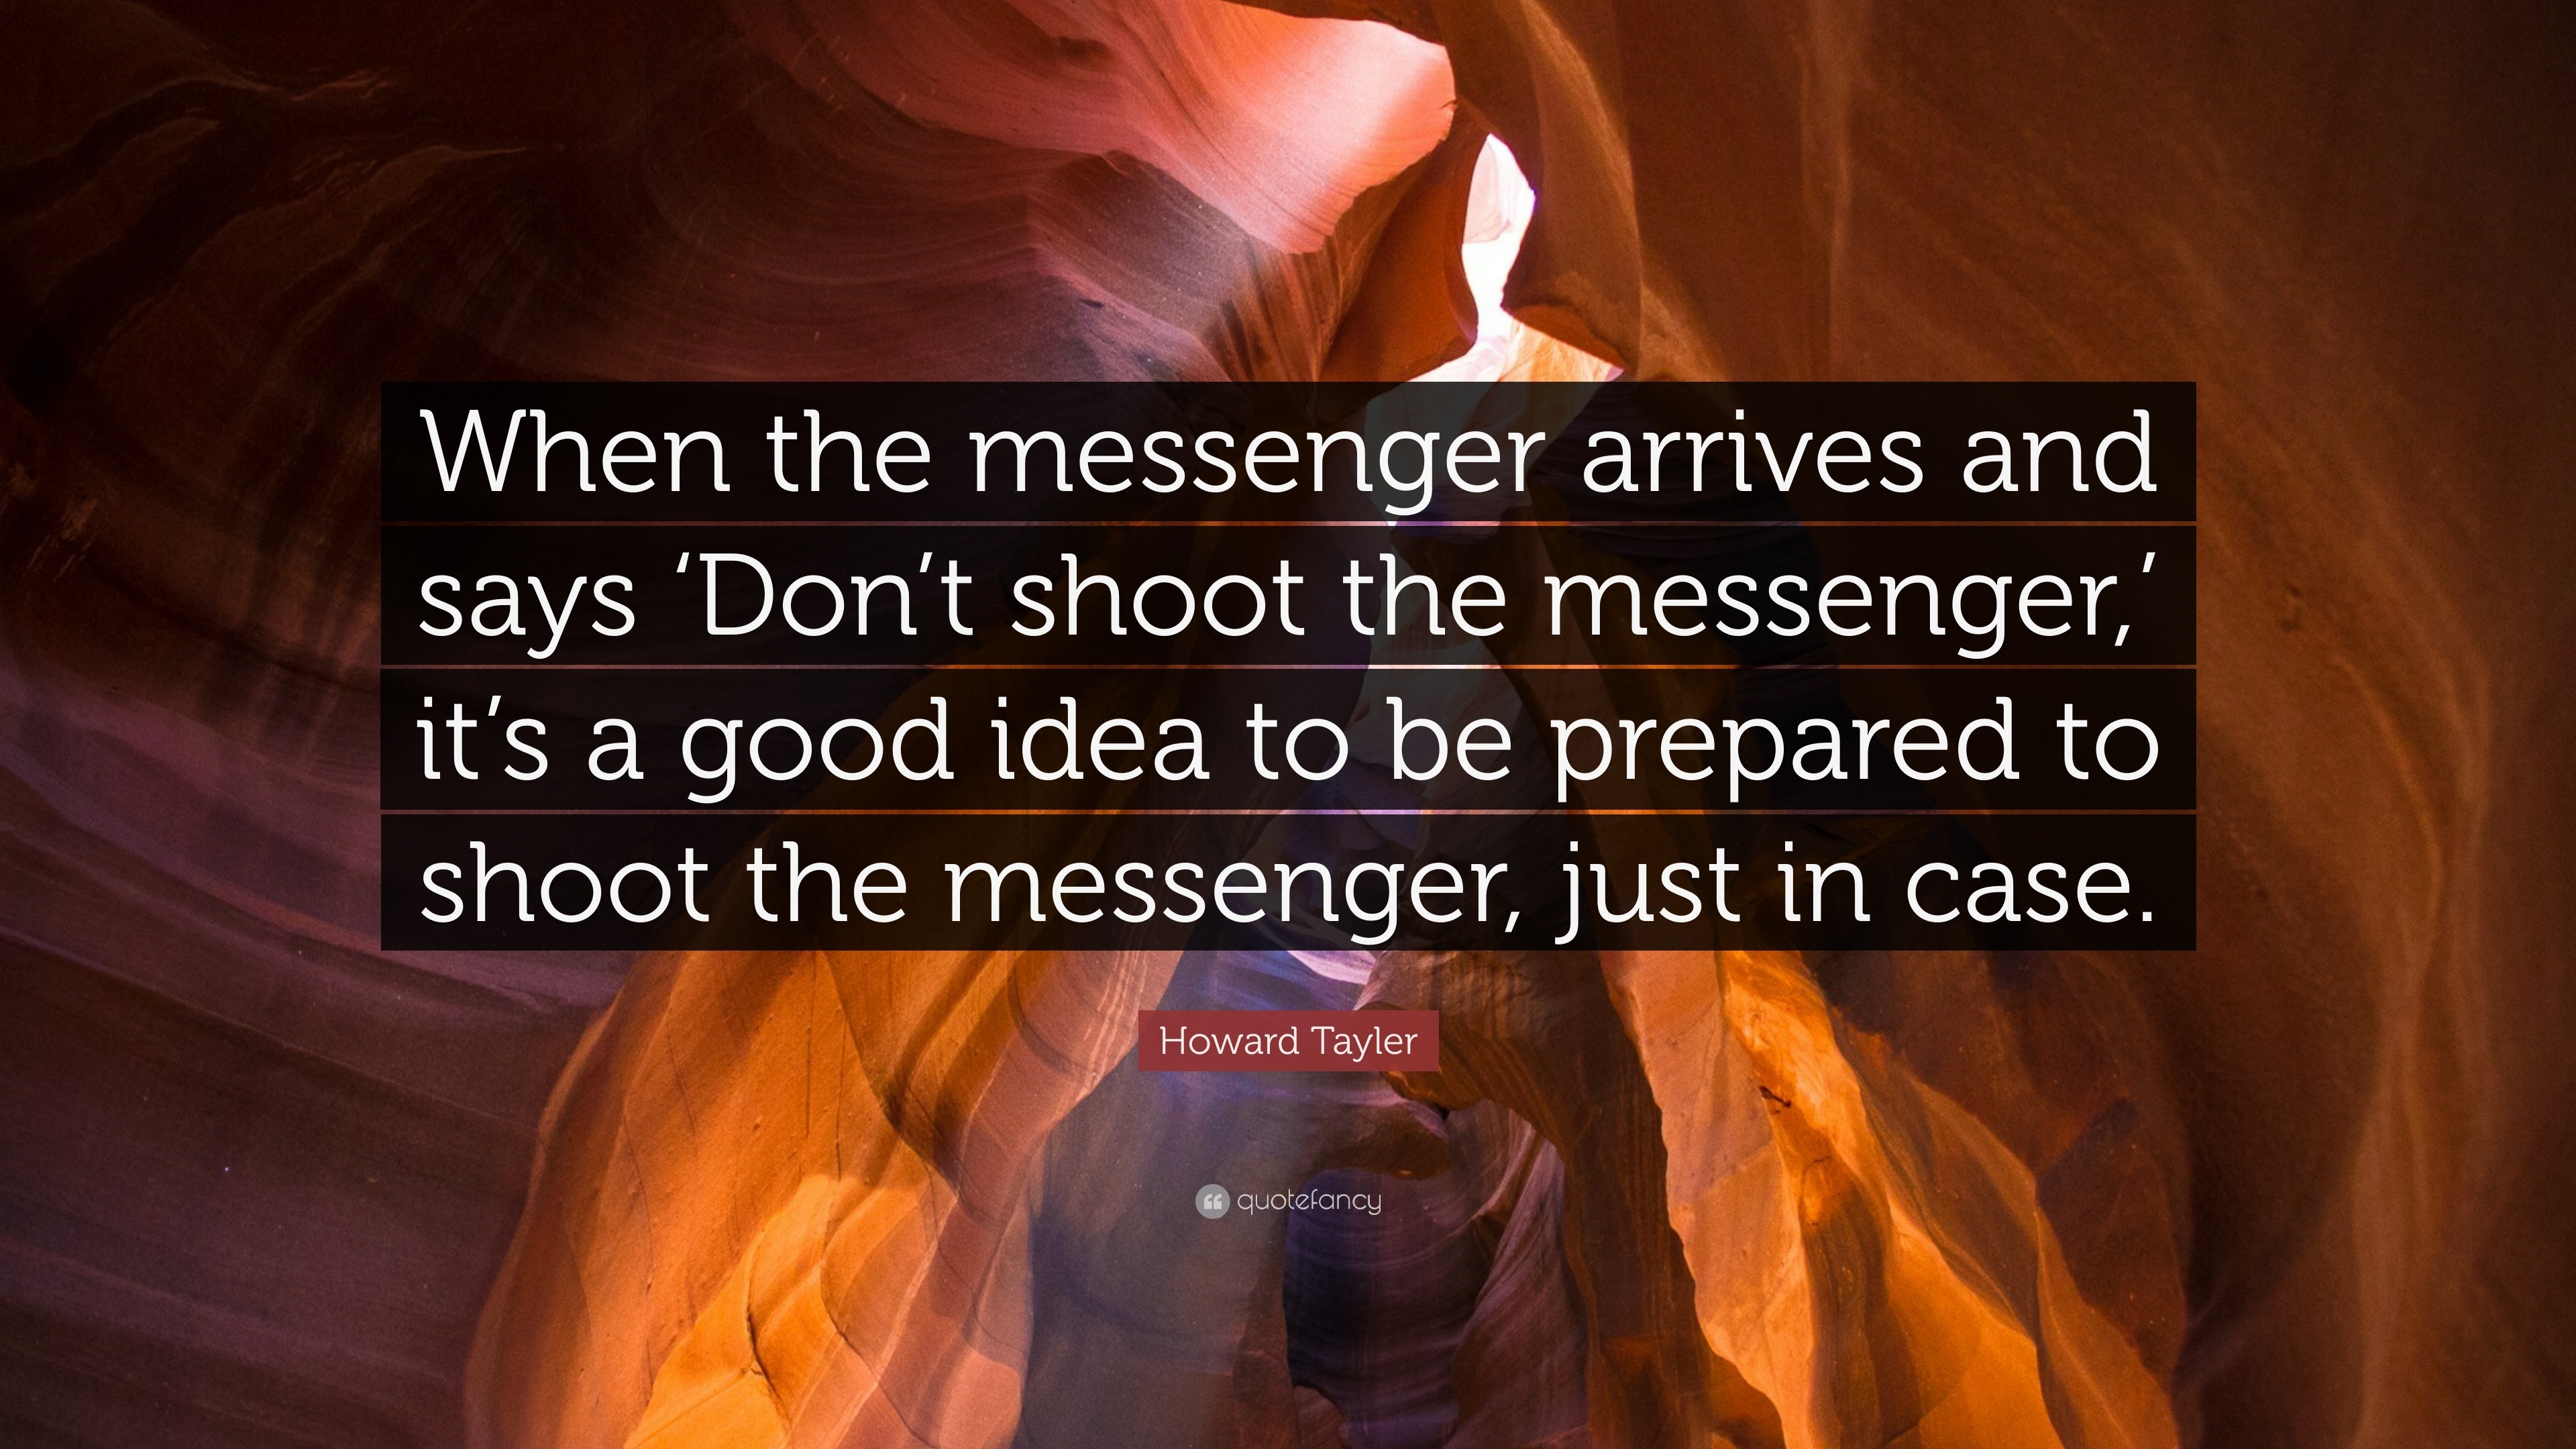 Howard Tayler Quote: “When the messenger arrives and says ‘Don’t shoot